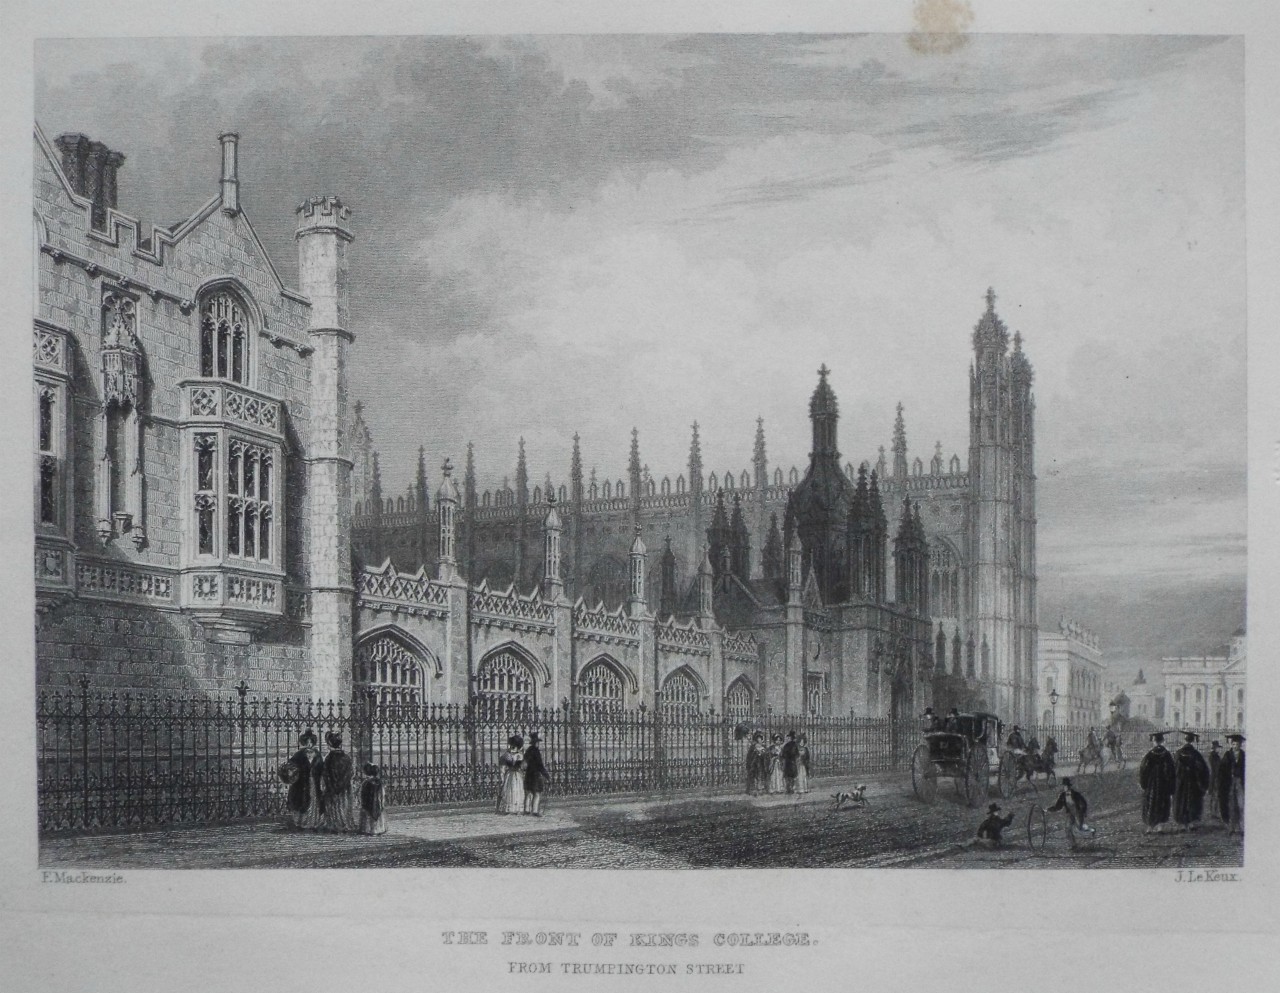 Print - The Front of Kings College, from Trumpington Street. - Le